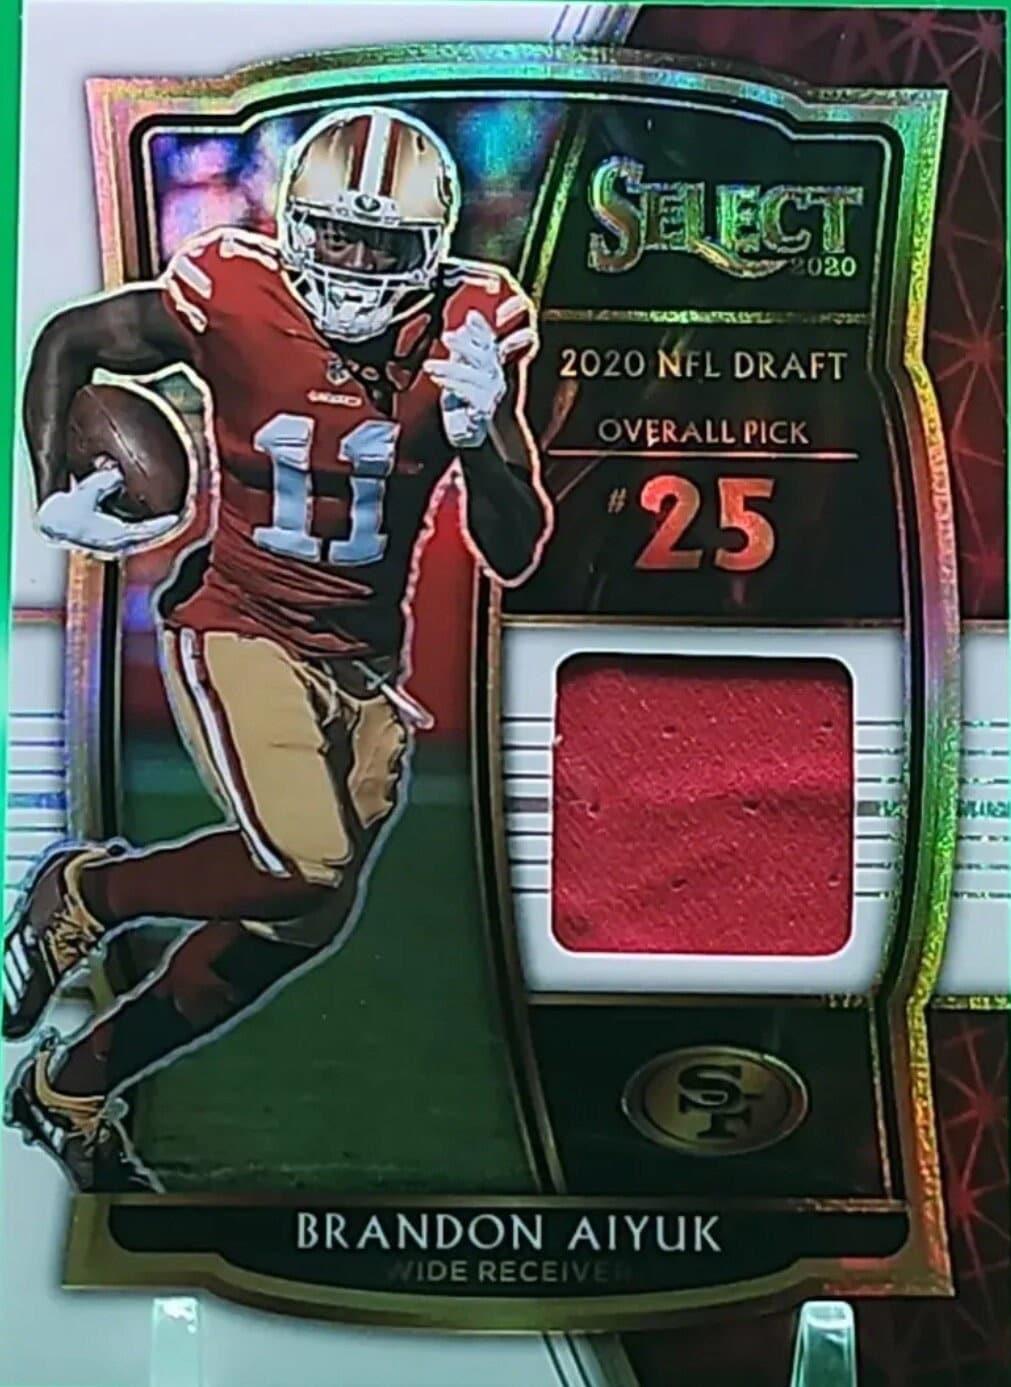 Brandon Aiyuk Rookie Card 2020 NFL Panini Rare Red Prizm Holo Patch SF 49rs  Star Rookie WR Sensation Birthday Gift Idea Mint Collectible 